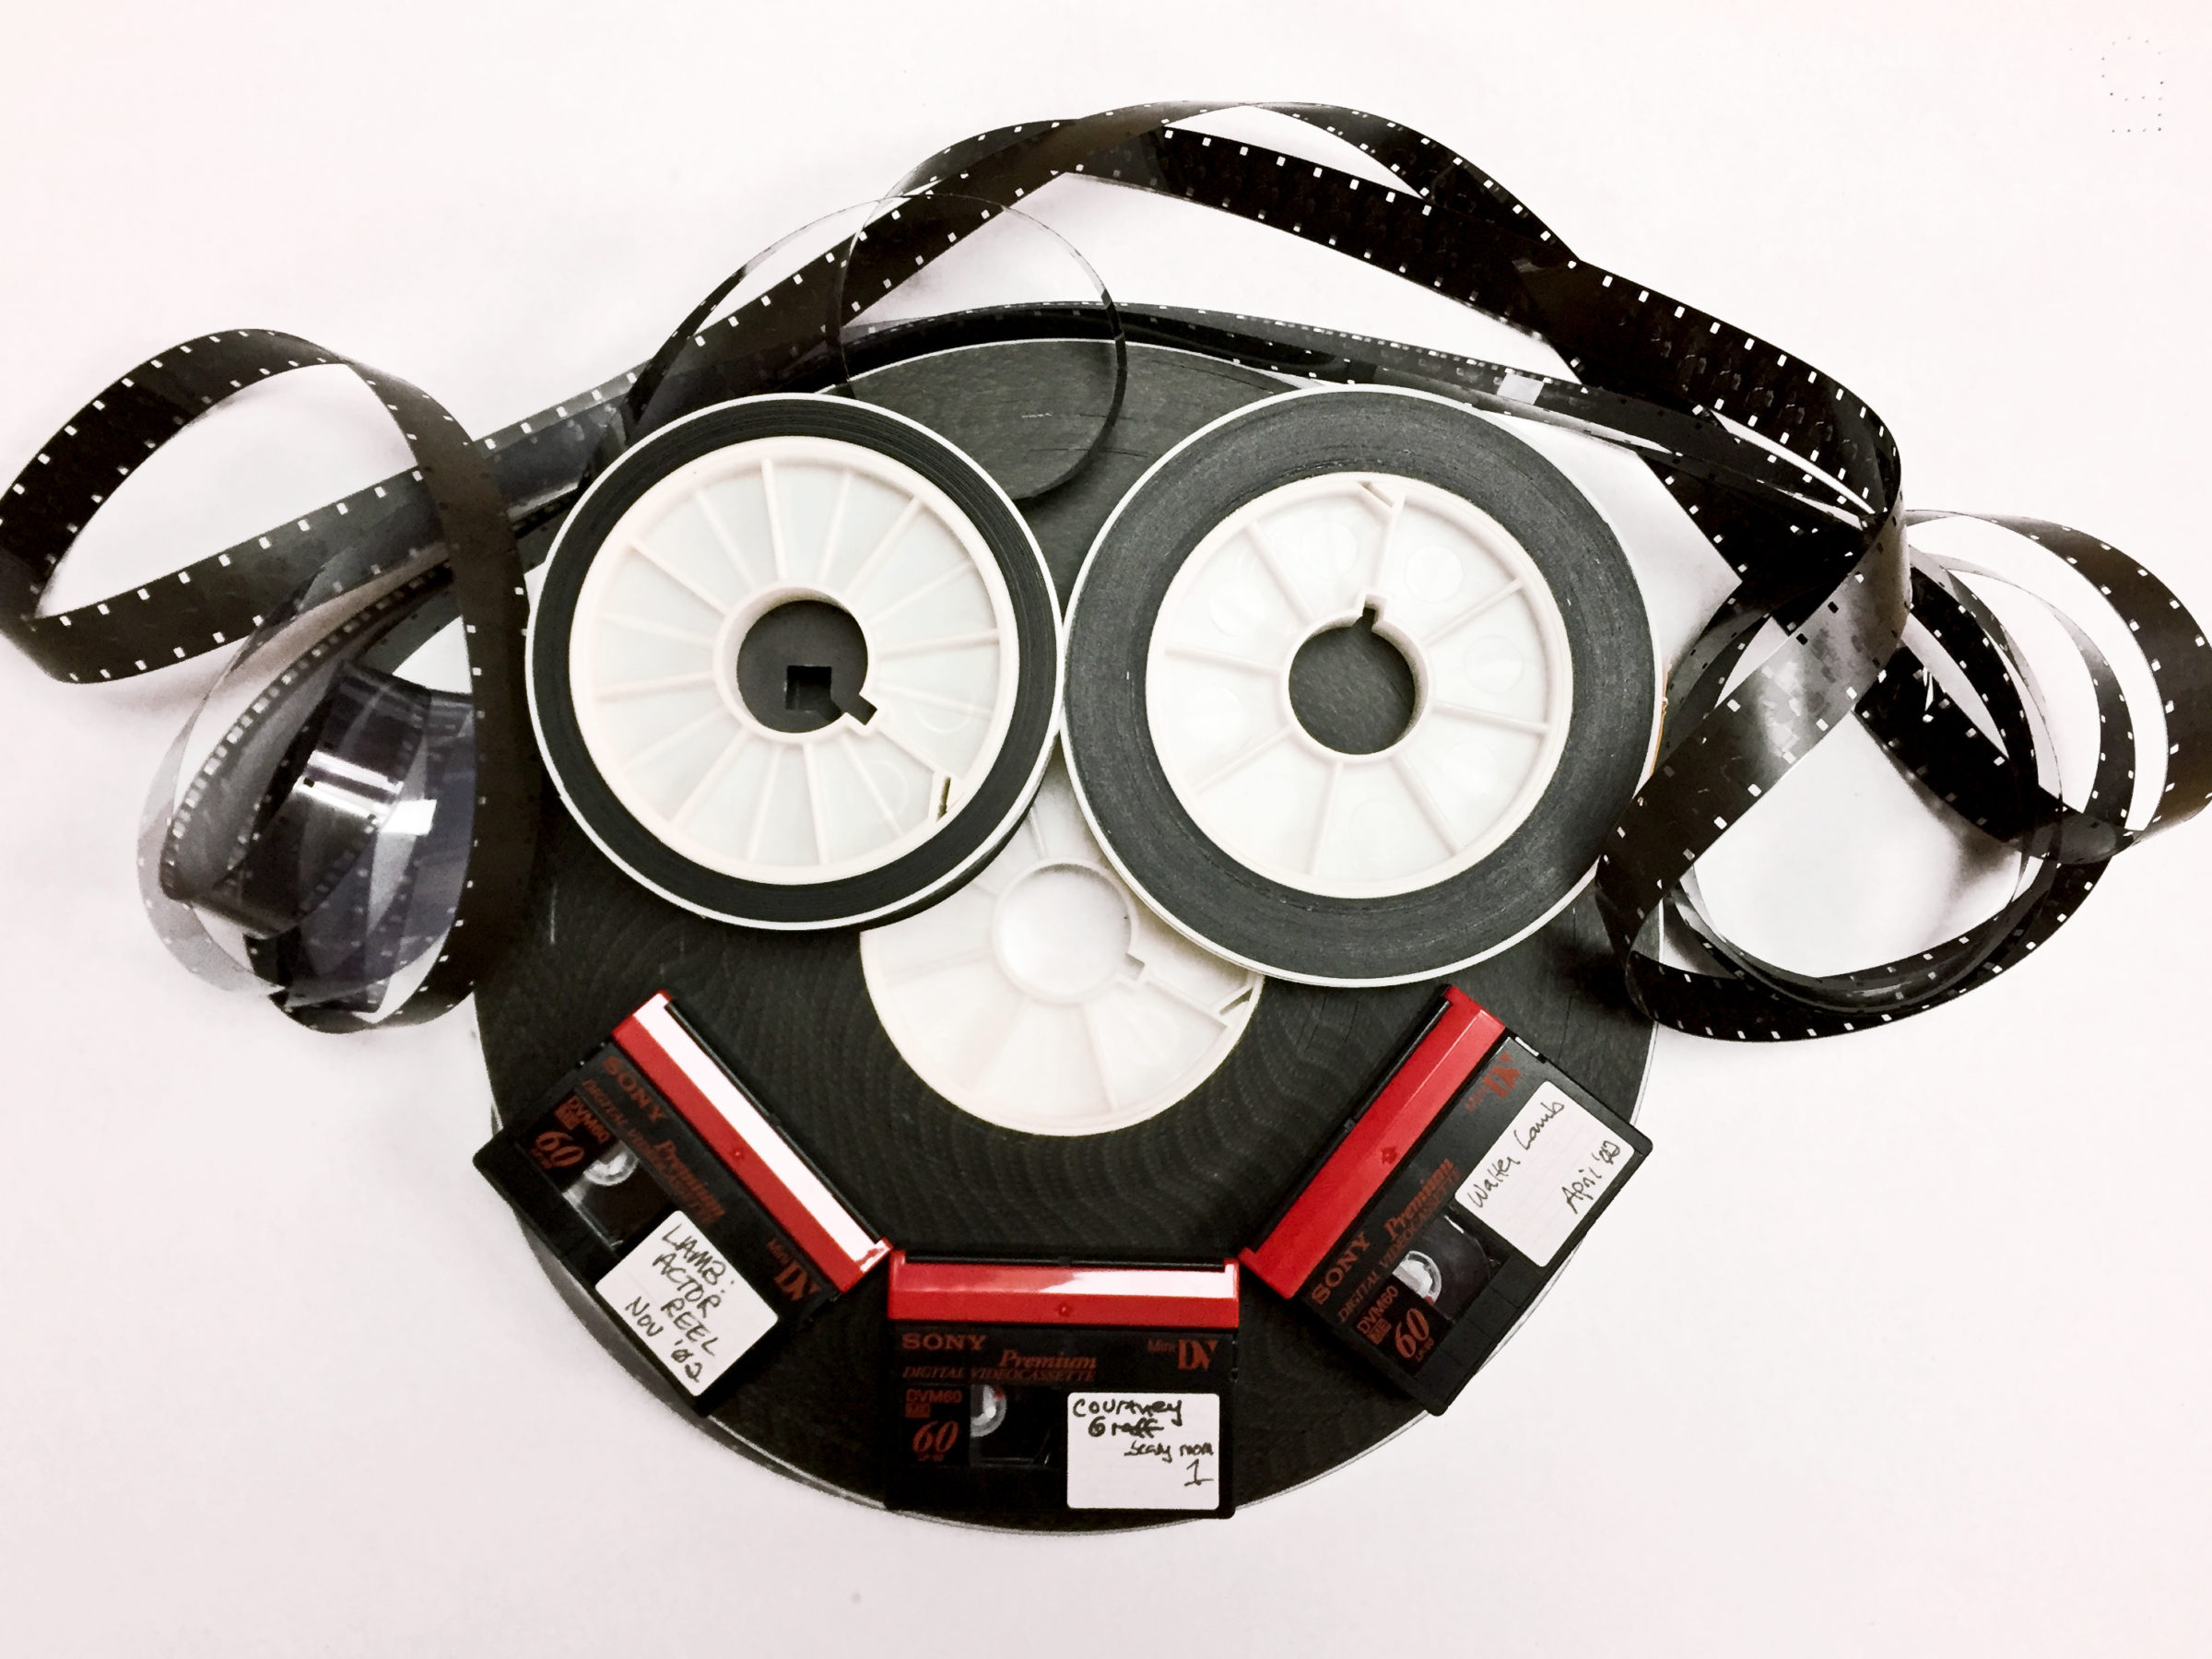 Smiling face made up of old reels of tape